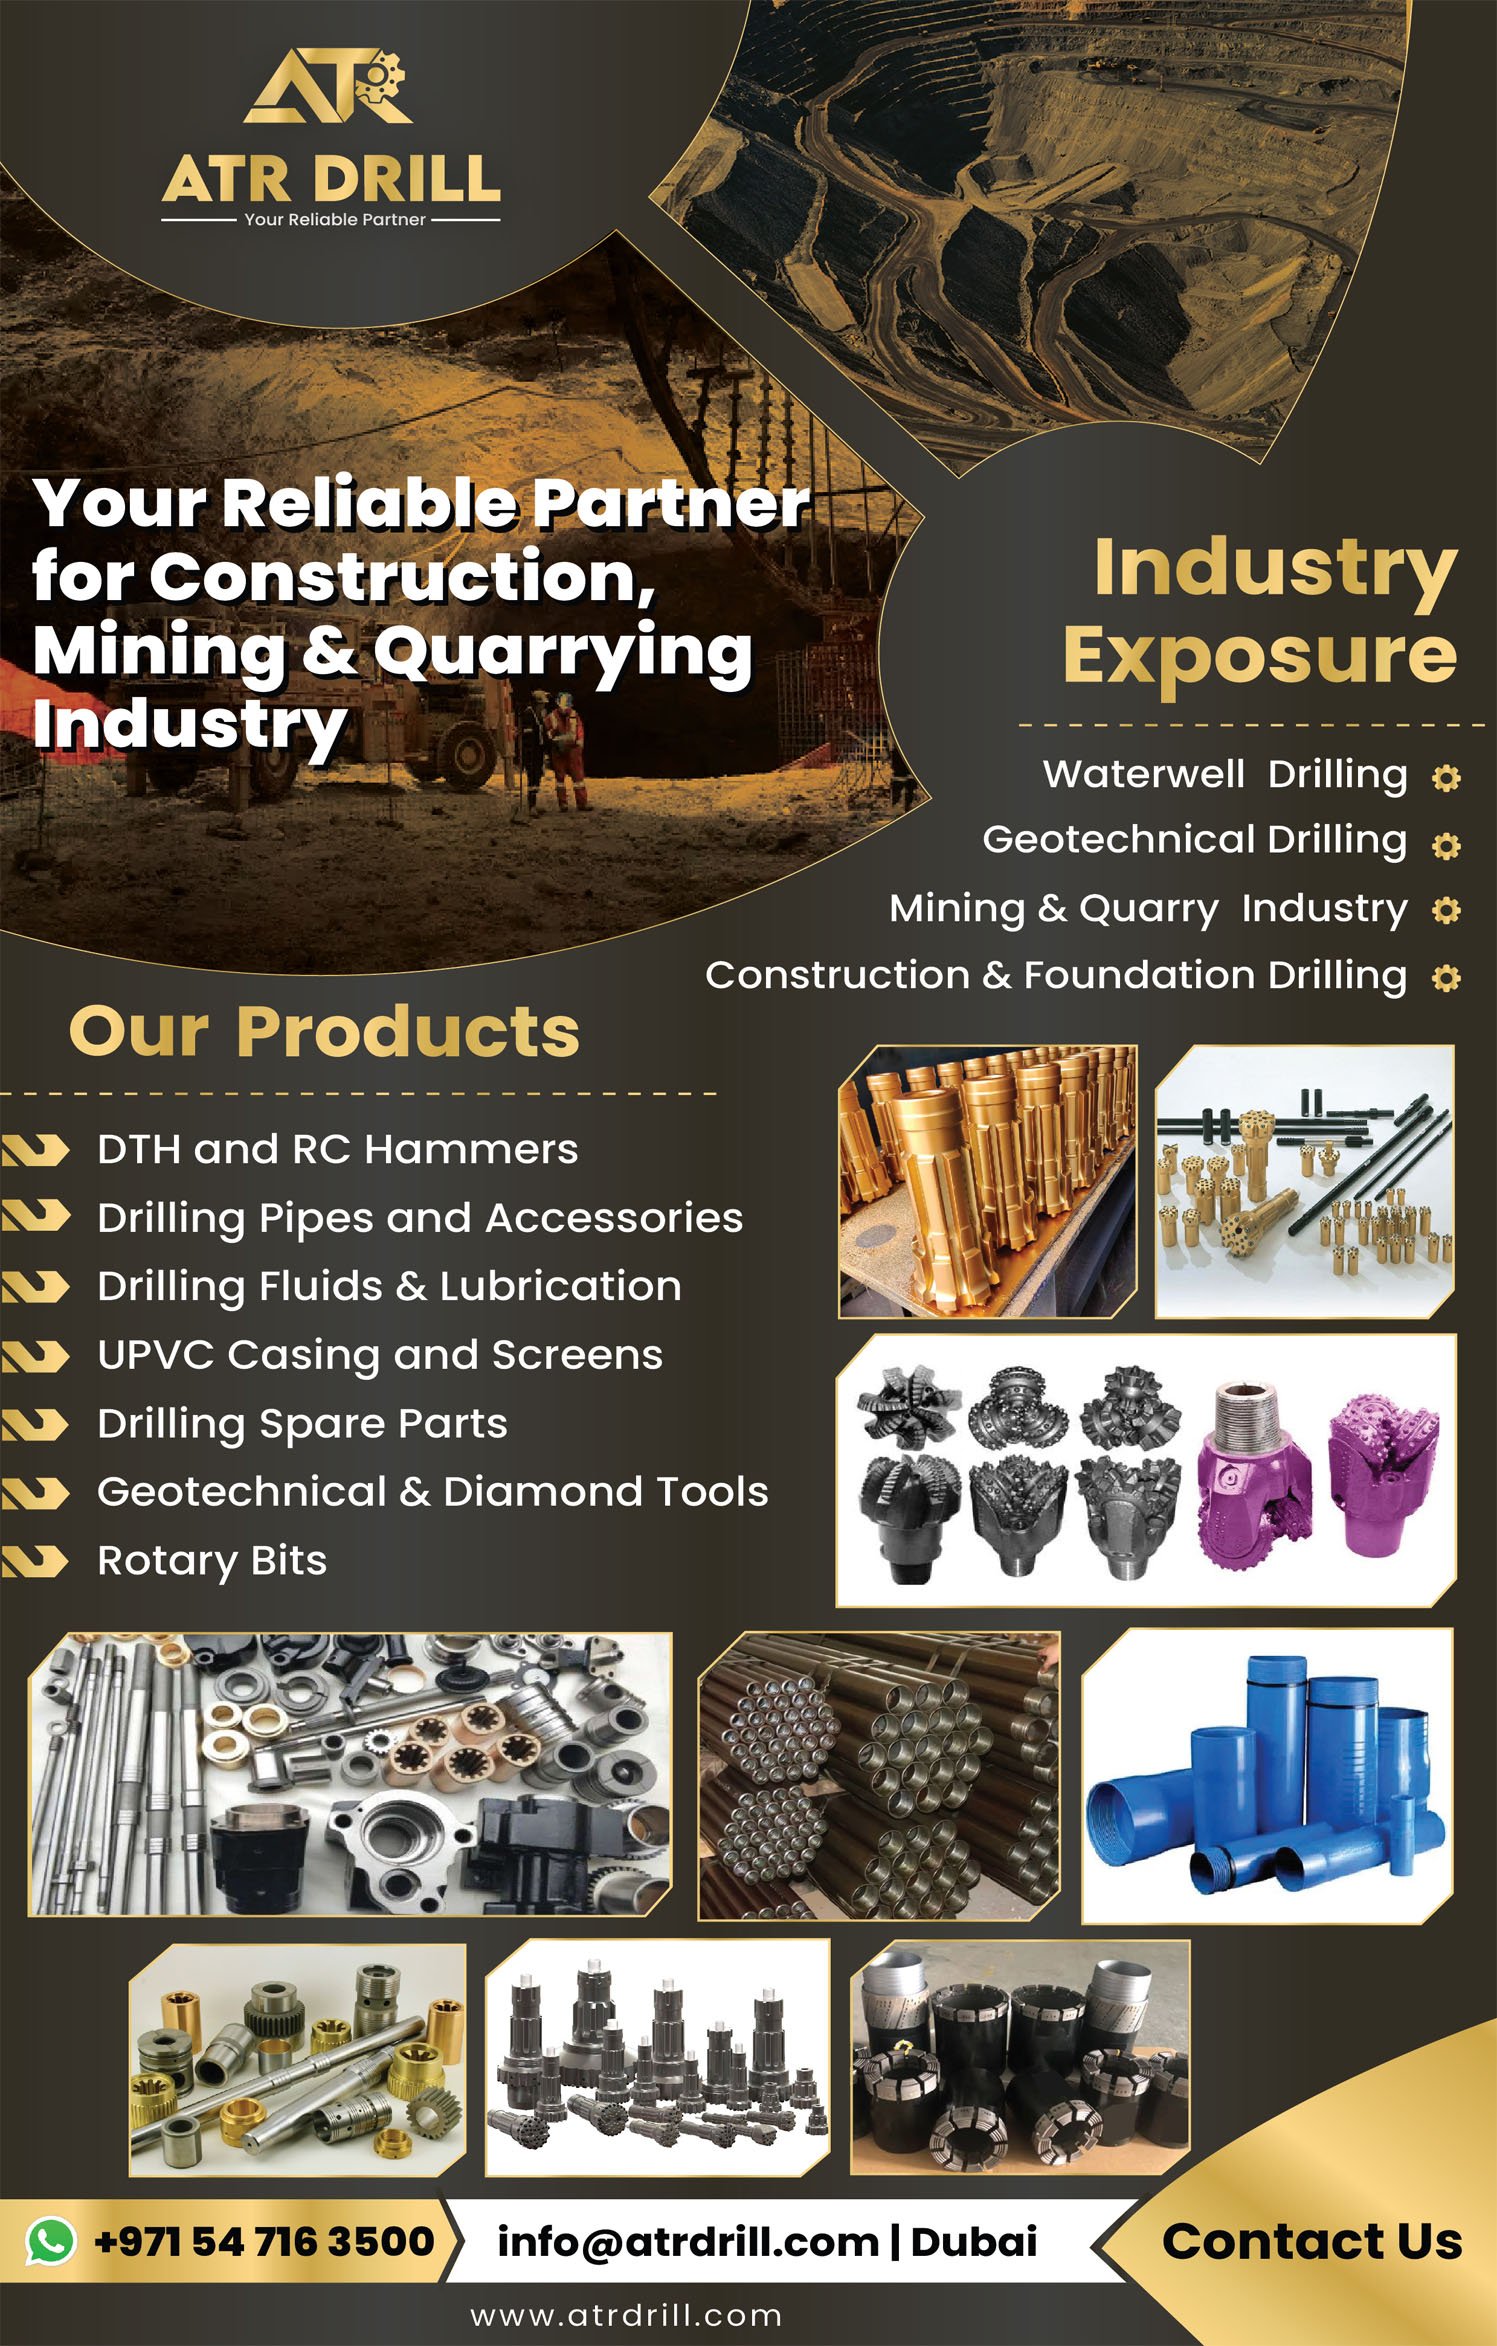 Construction And Foundation Drilling Tool Suppliers